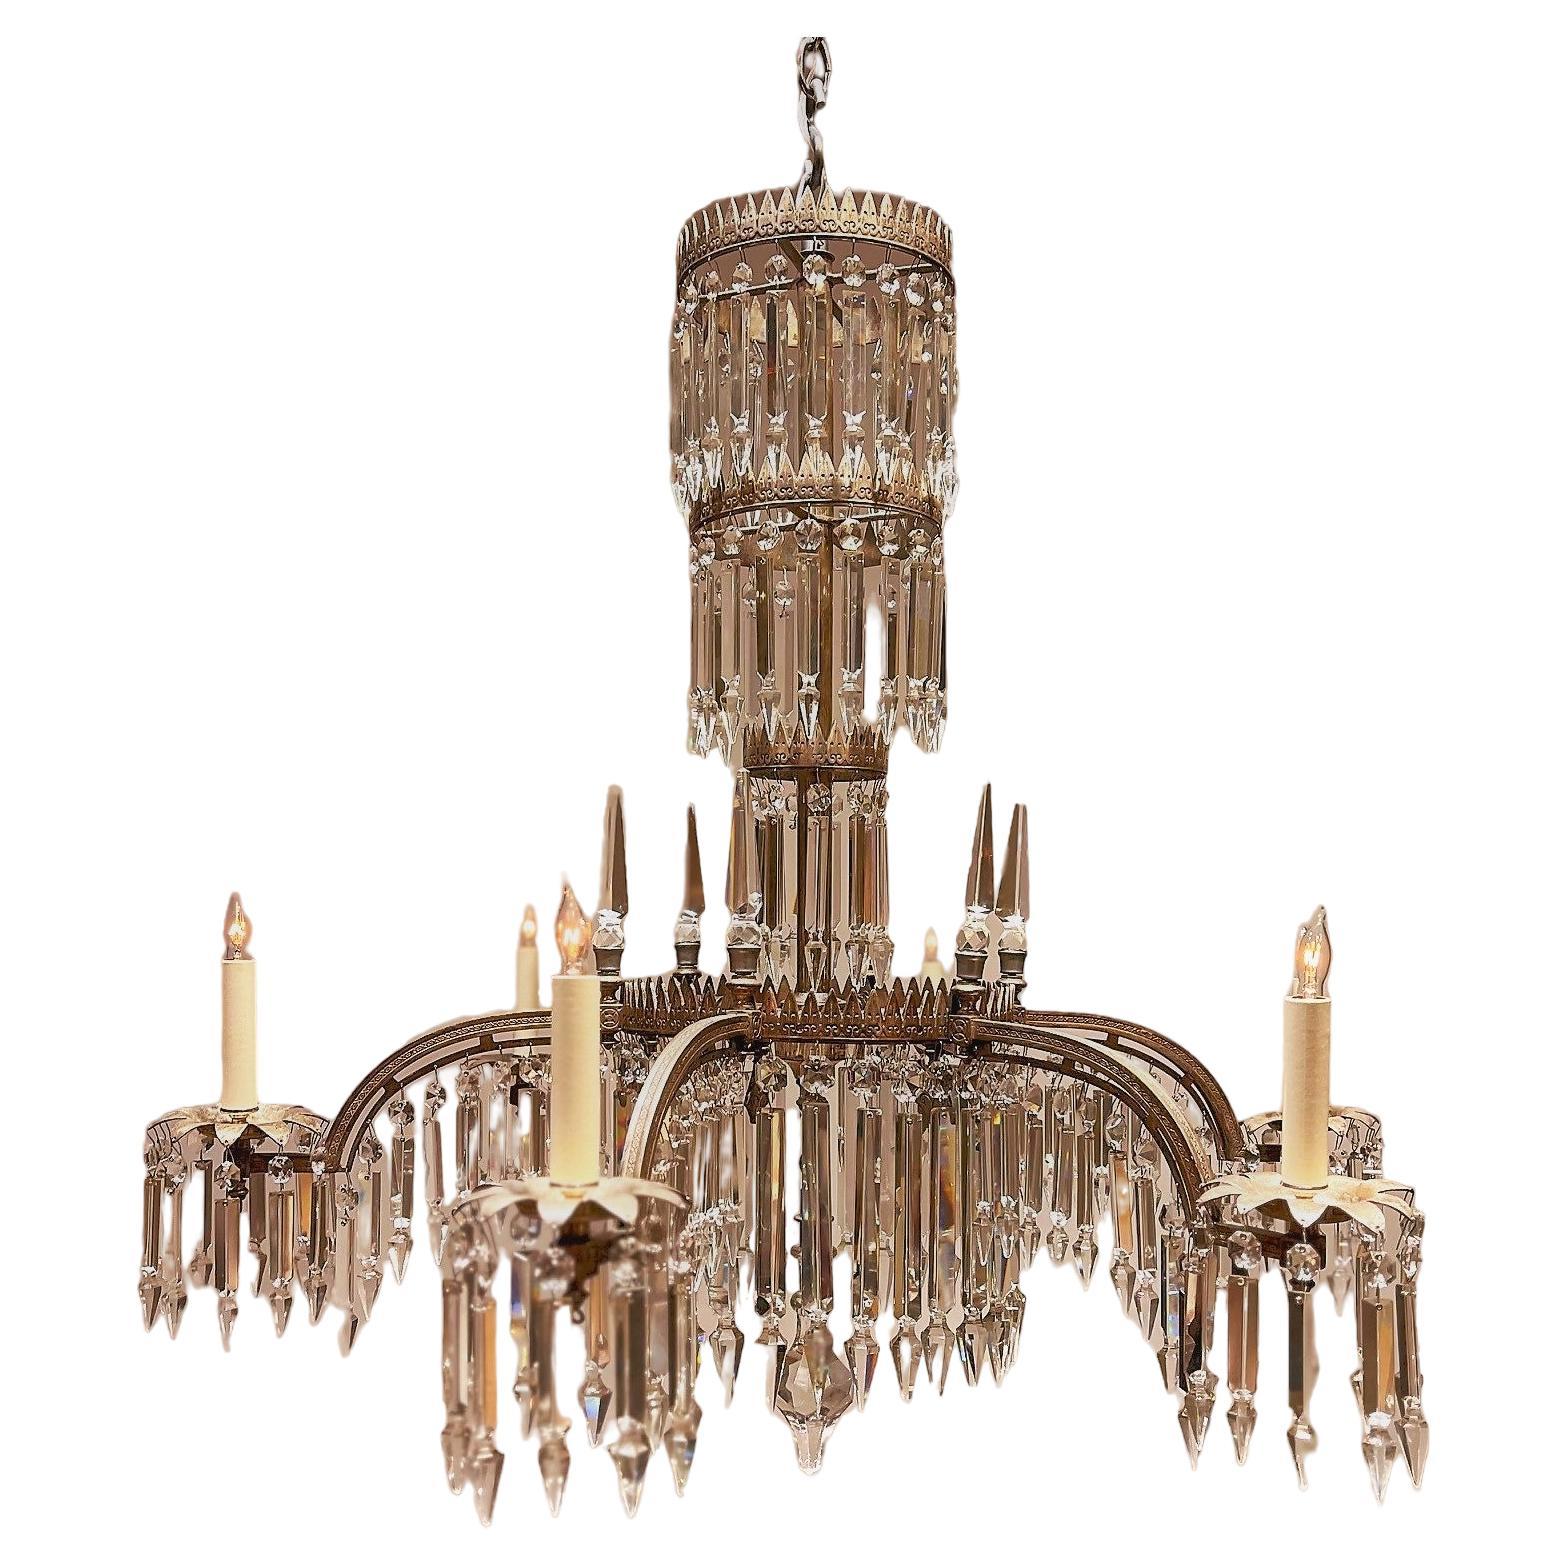 6-Light Silvered Bronze & Crystal Electrified Gasolier, America, Circa:1850 For Sale